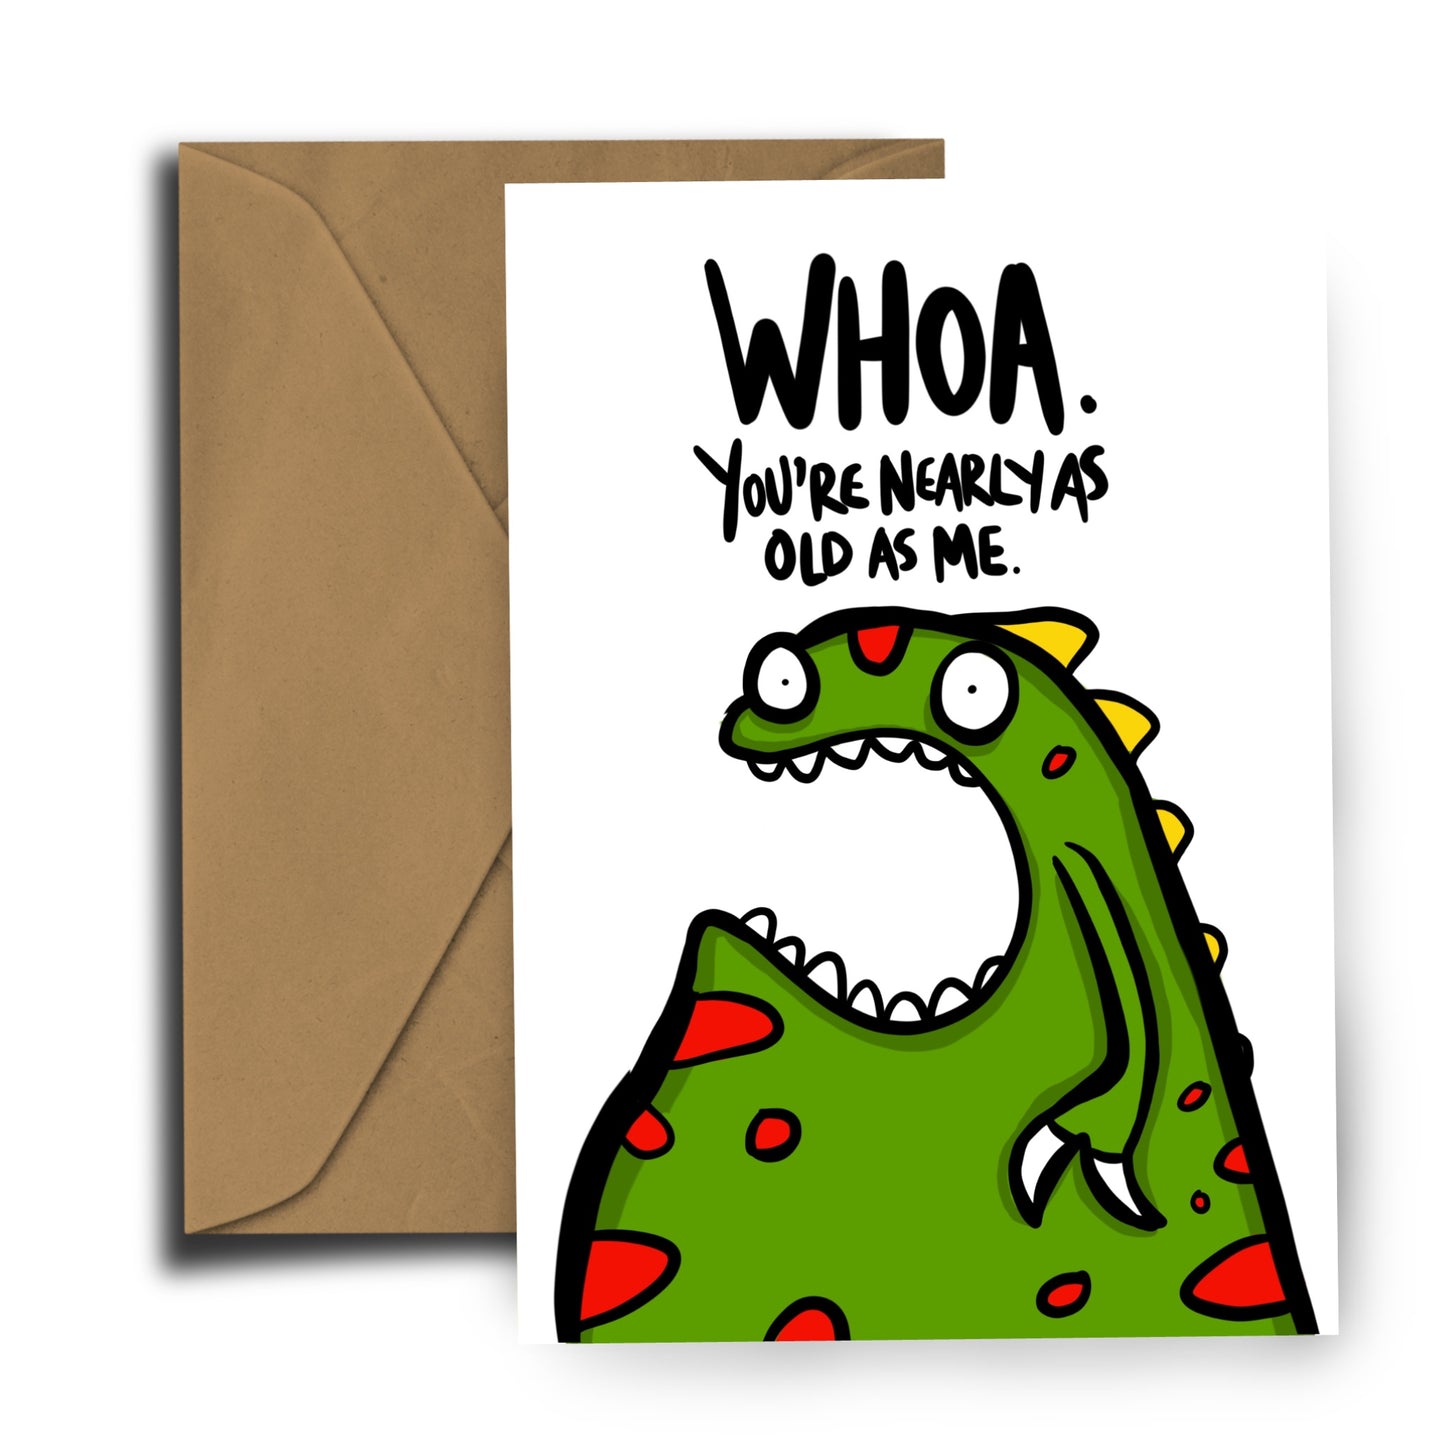 Whoa - You're nearly as old as me - Birthday Card